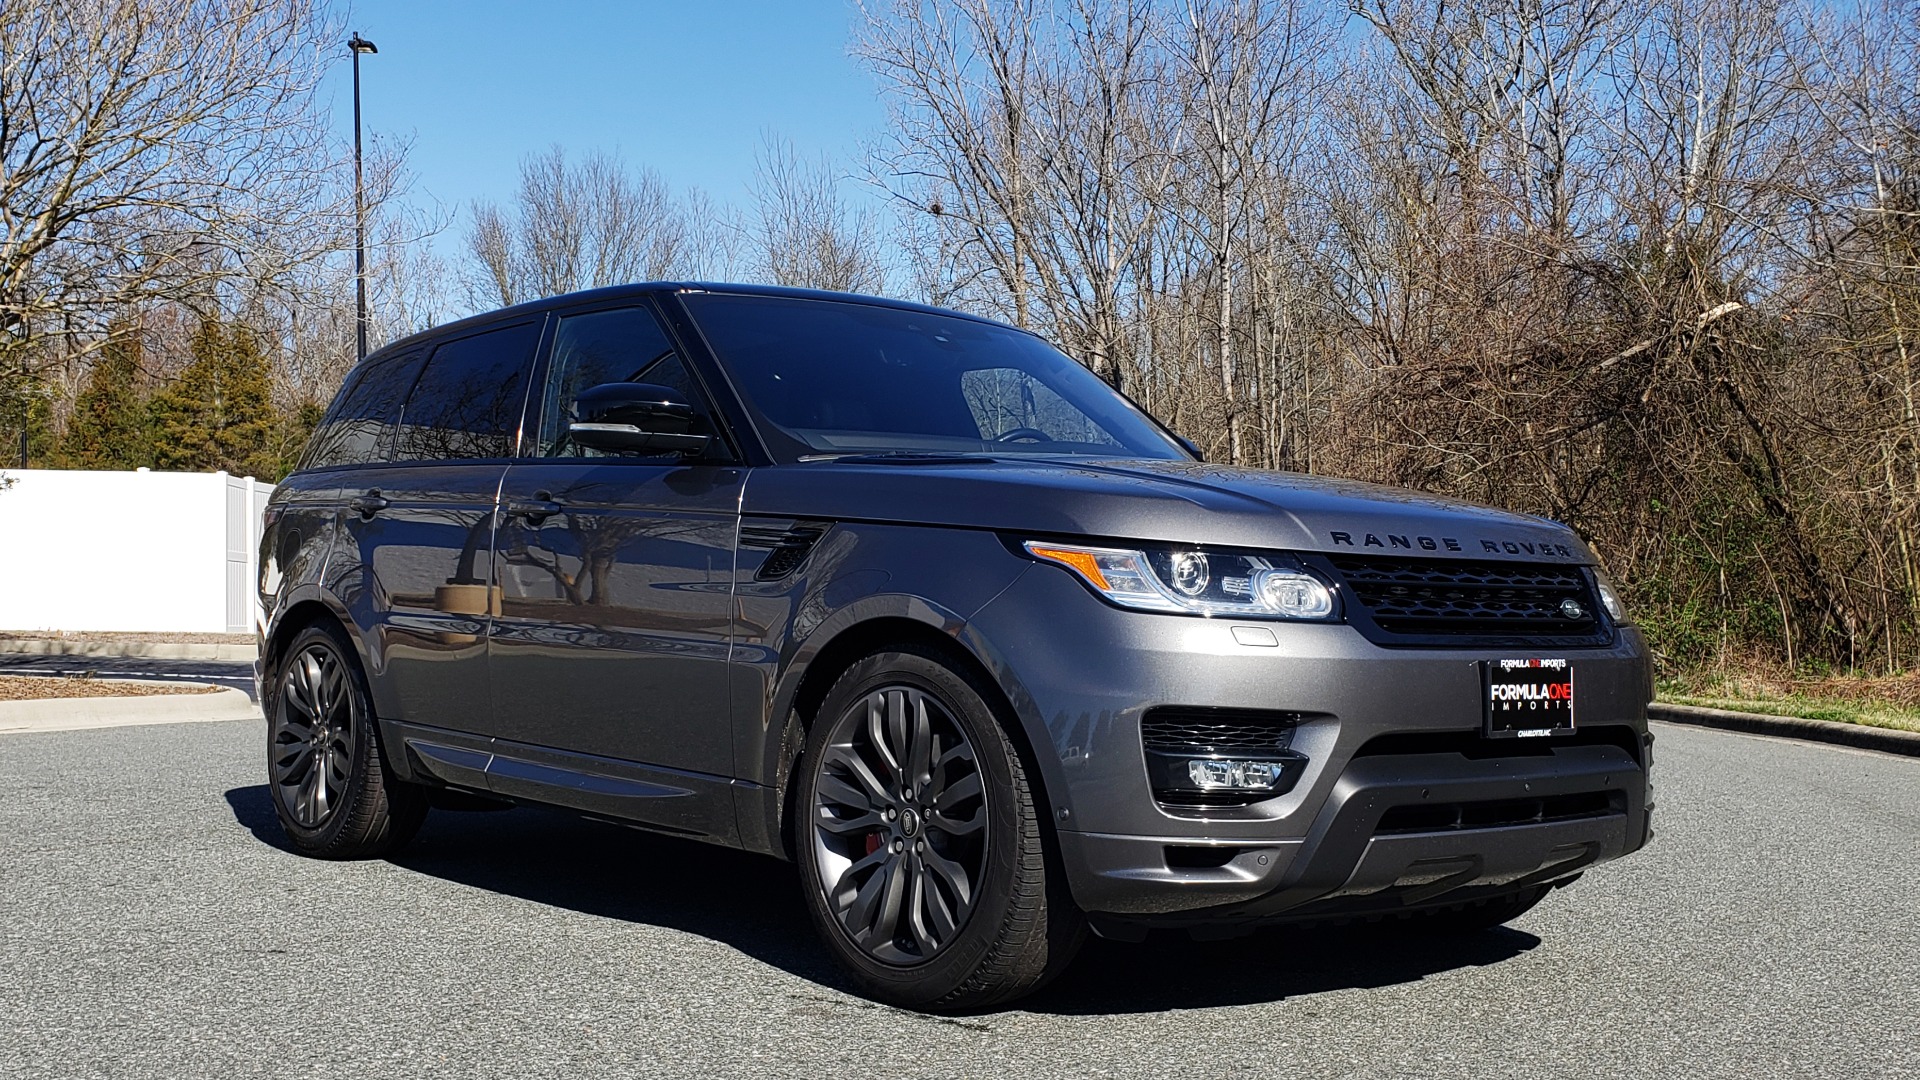 Used 2017 Land Rover RANGE ROVER SPORT HSE DYNAMIC / NAV / SUNROOF / REARVIEW for sale Sold at Formula Imports in Charlotte NC 28227 4